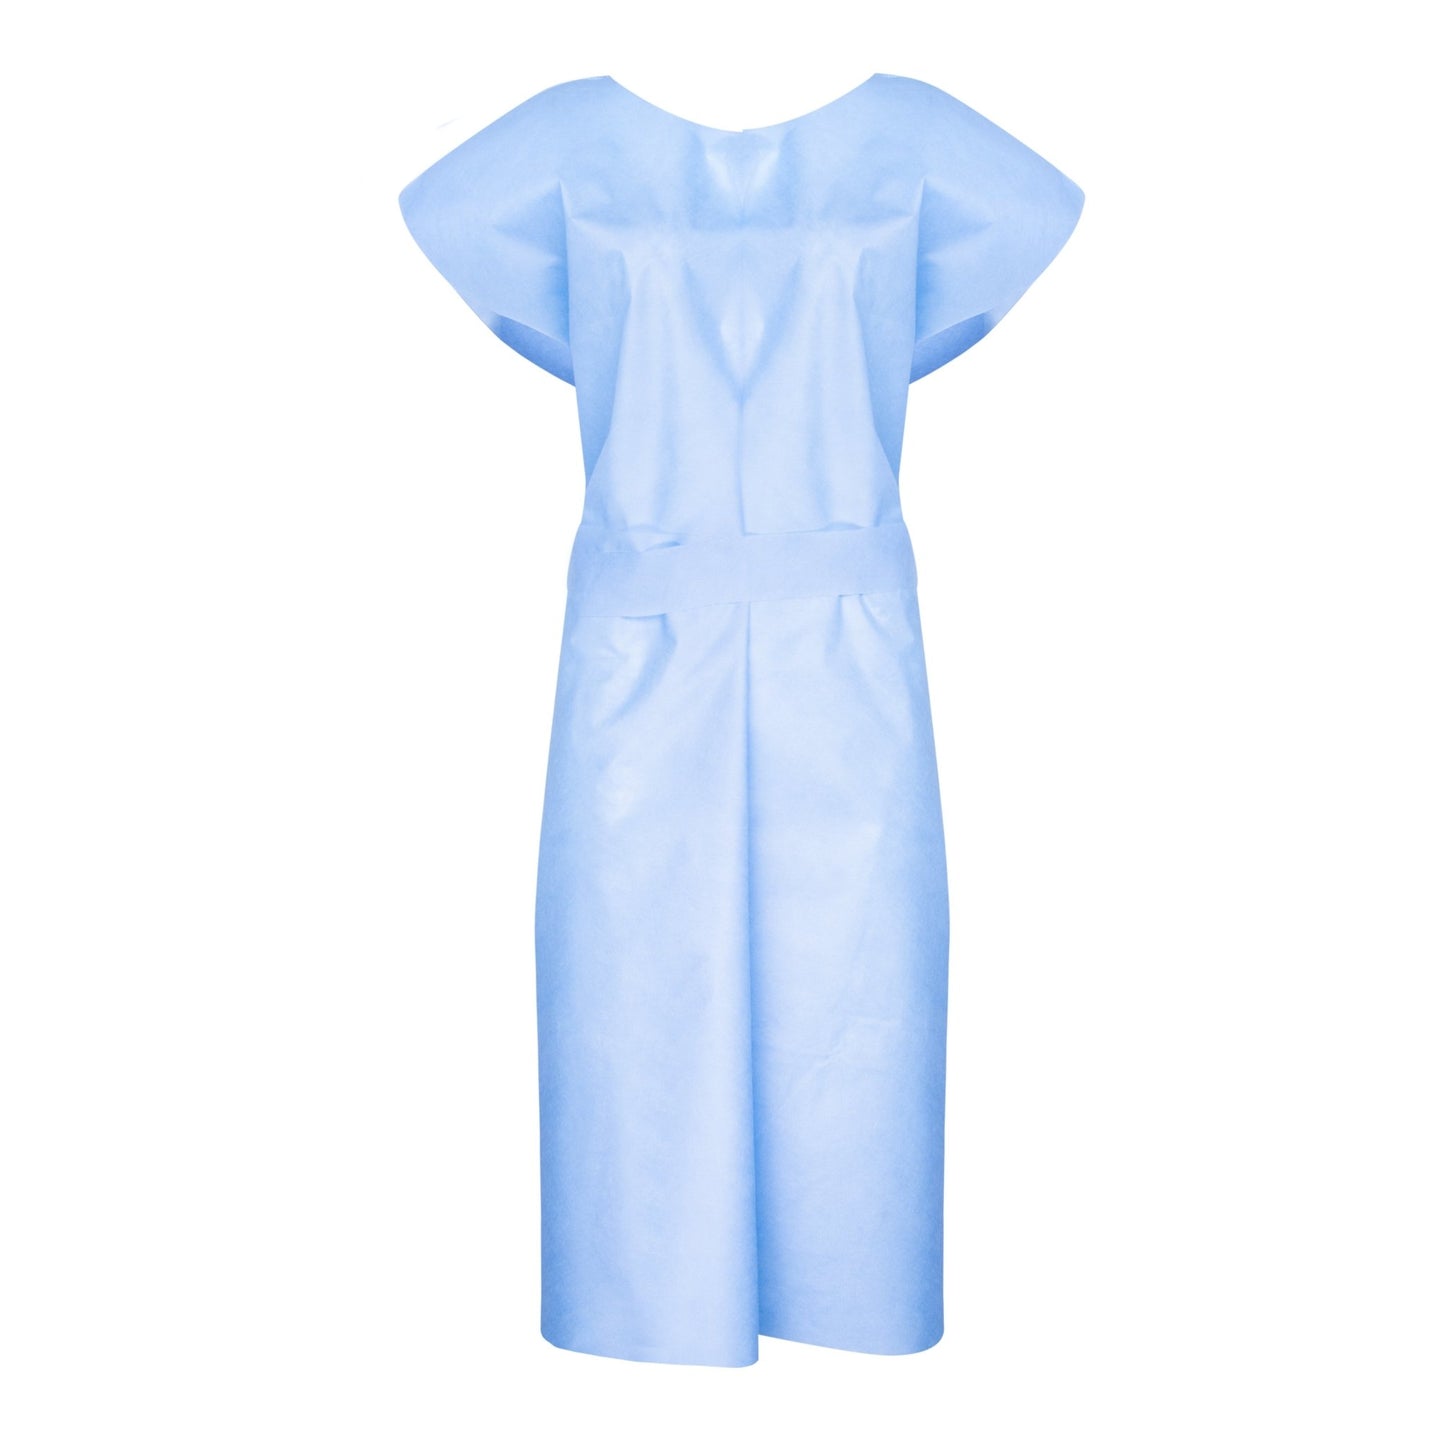 Disposable Exam Gowns - 50 pack - DisposableGowns.com